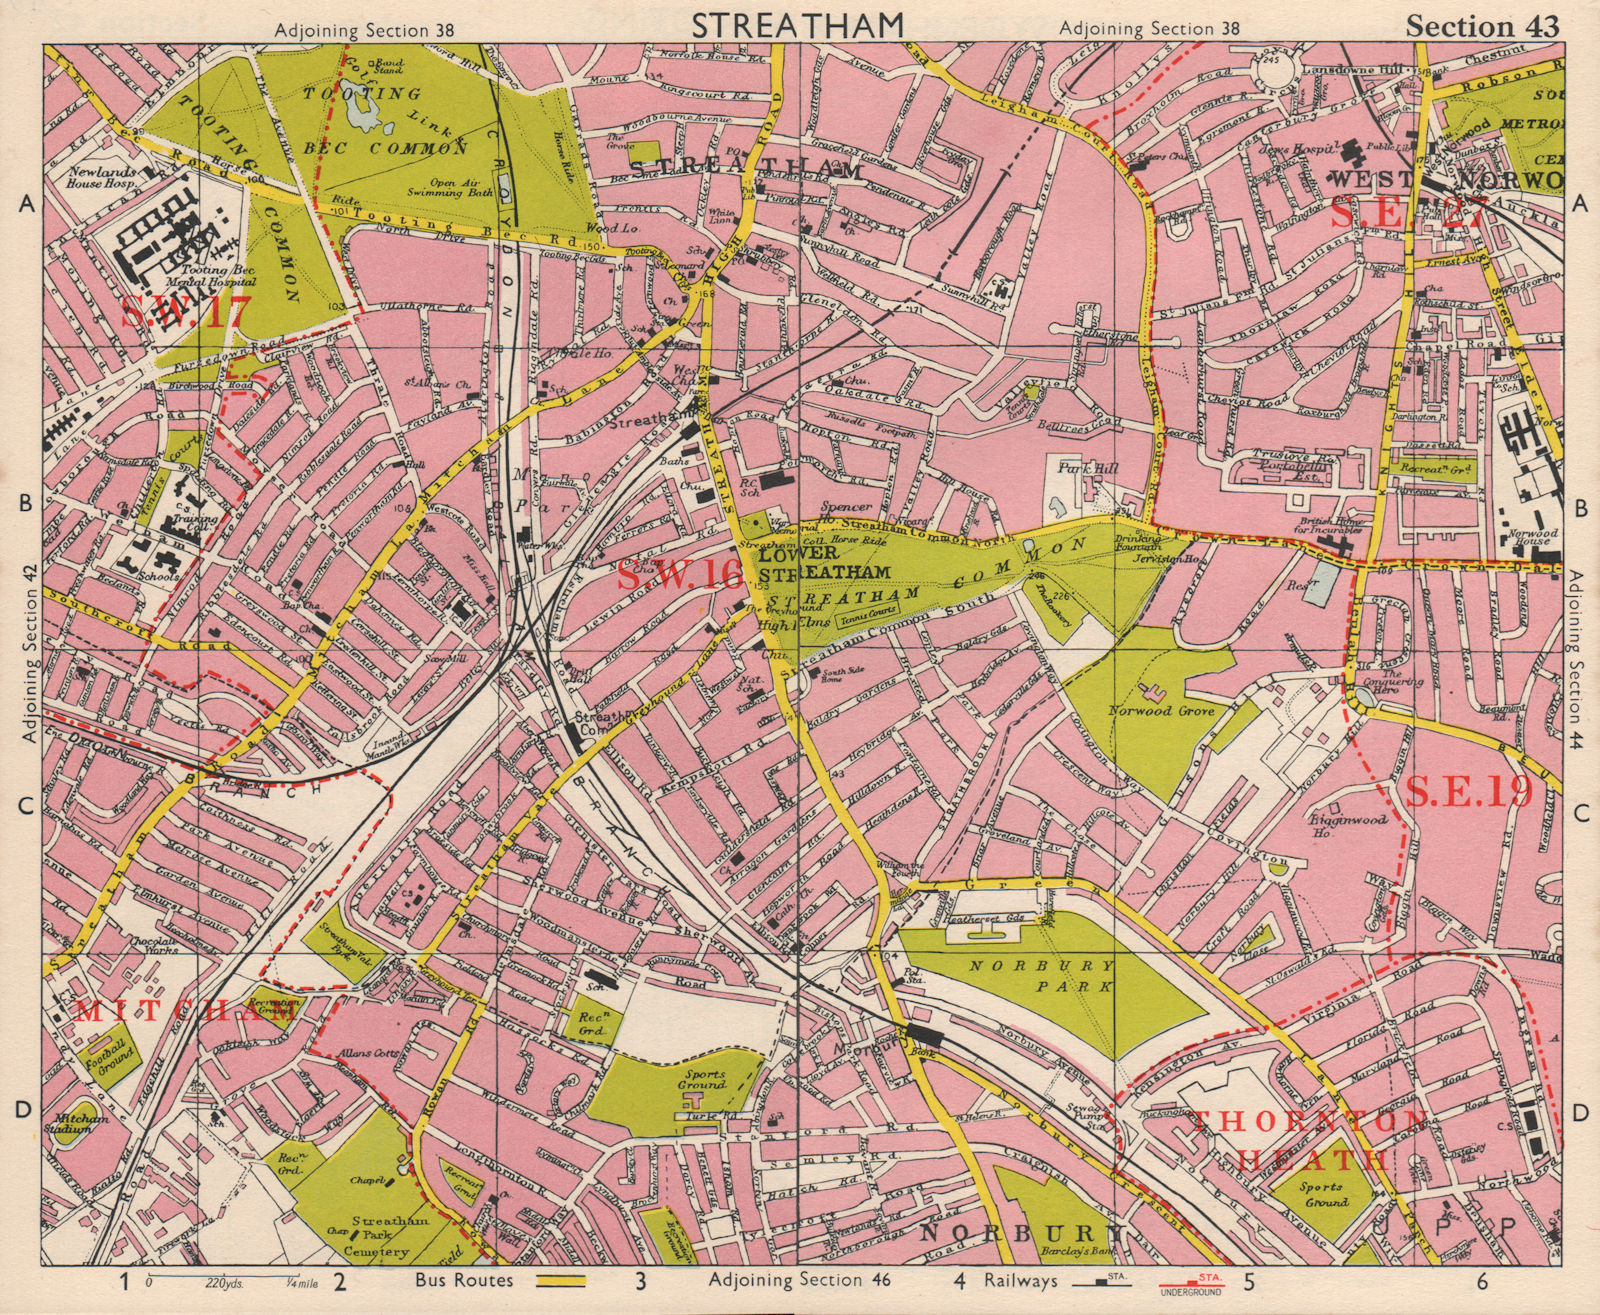 S LONDON. Streatham/Vale Norbury Tooting Bec West Norwood. BACON 1963 old map